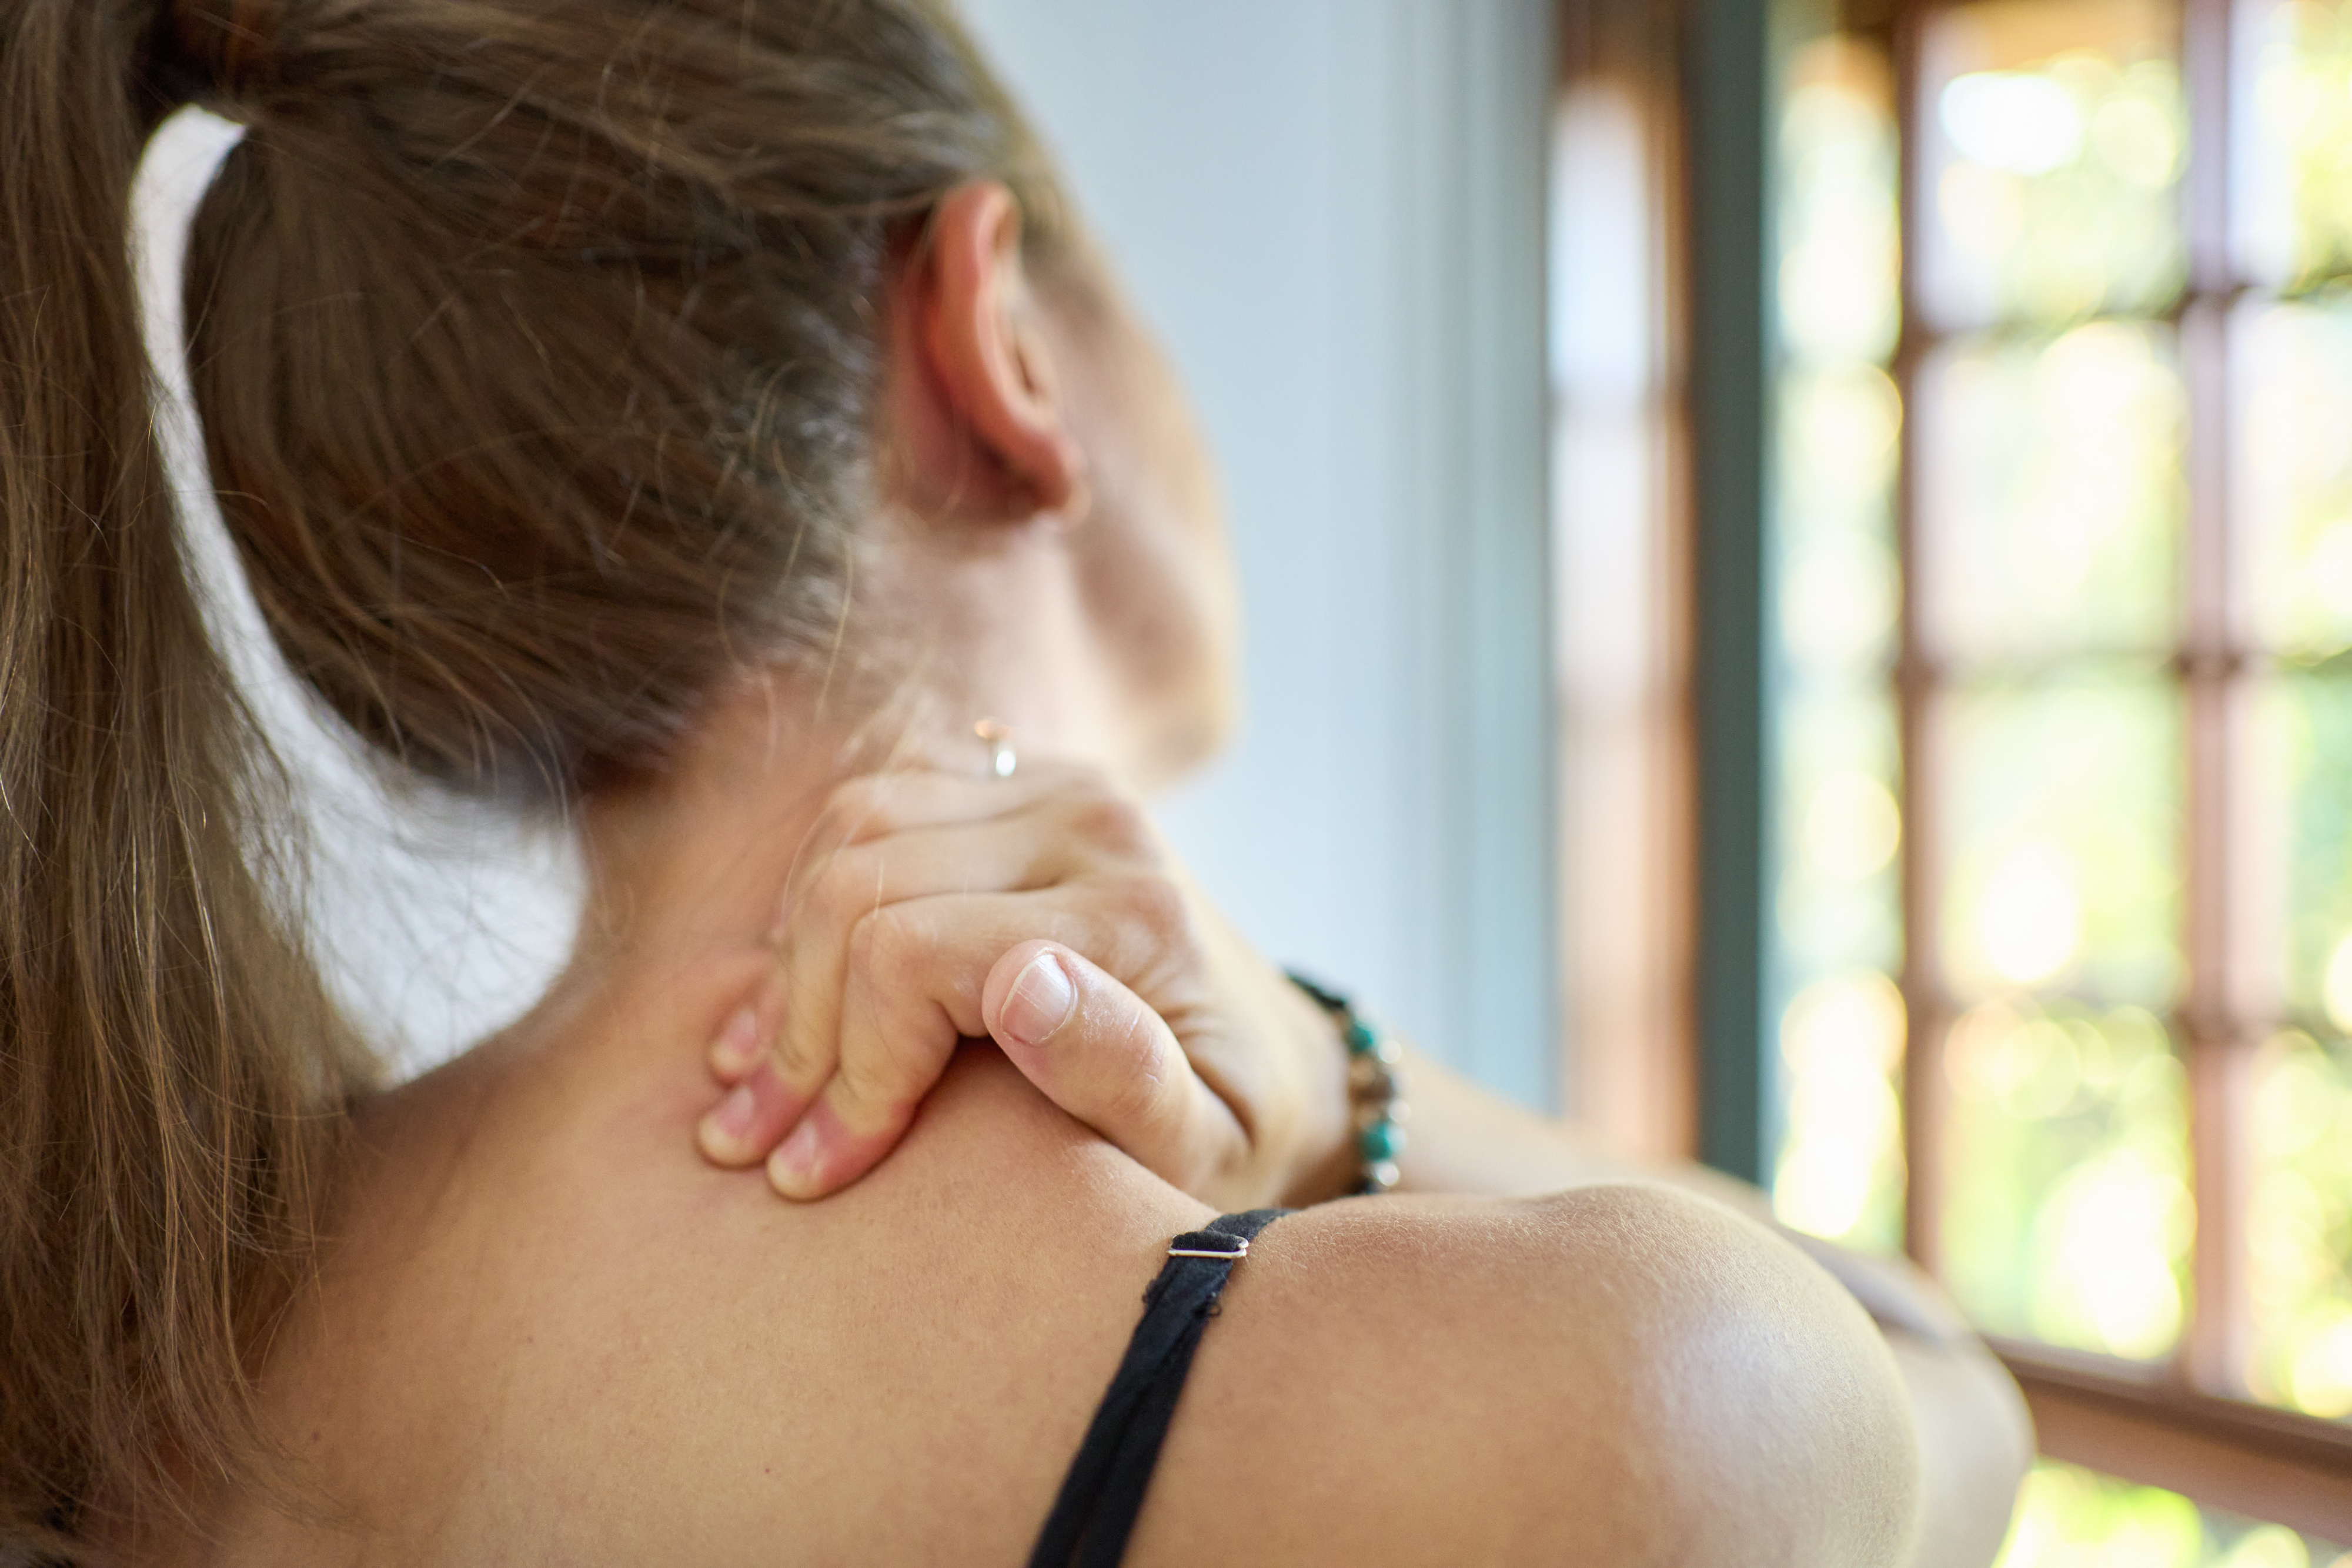 A woman grips her neck in pain